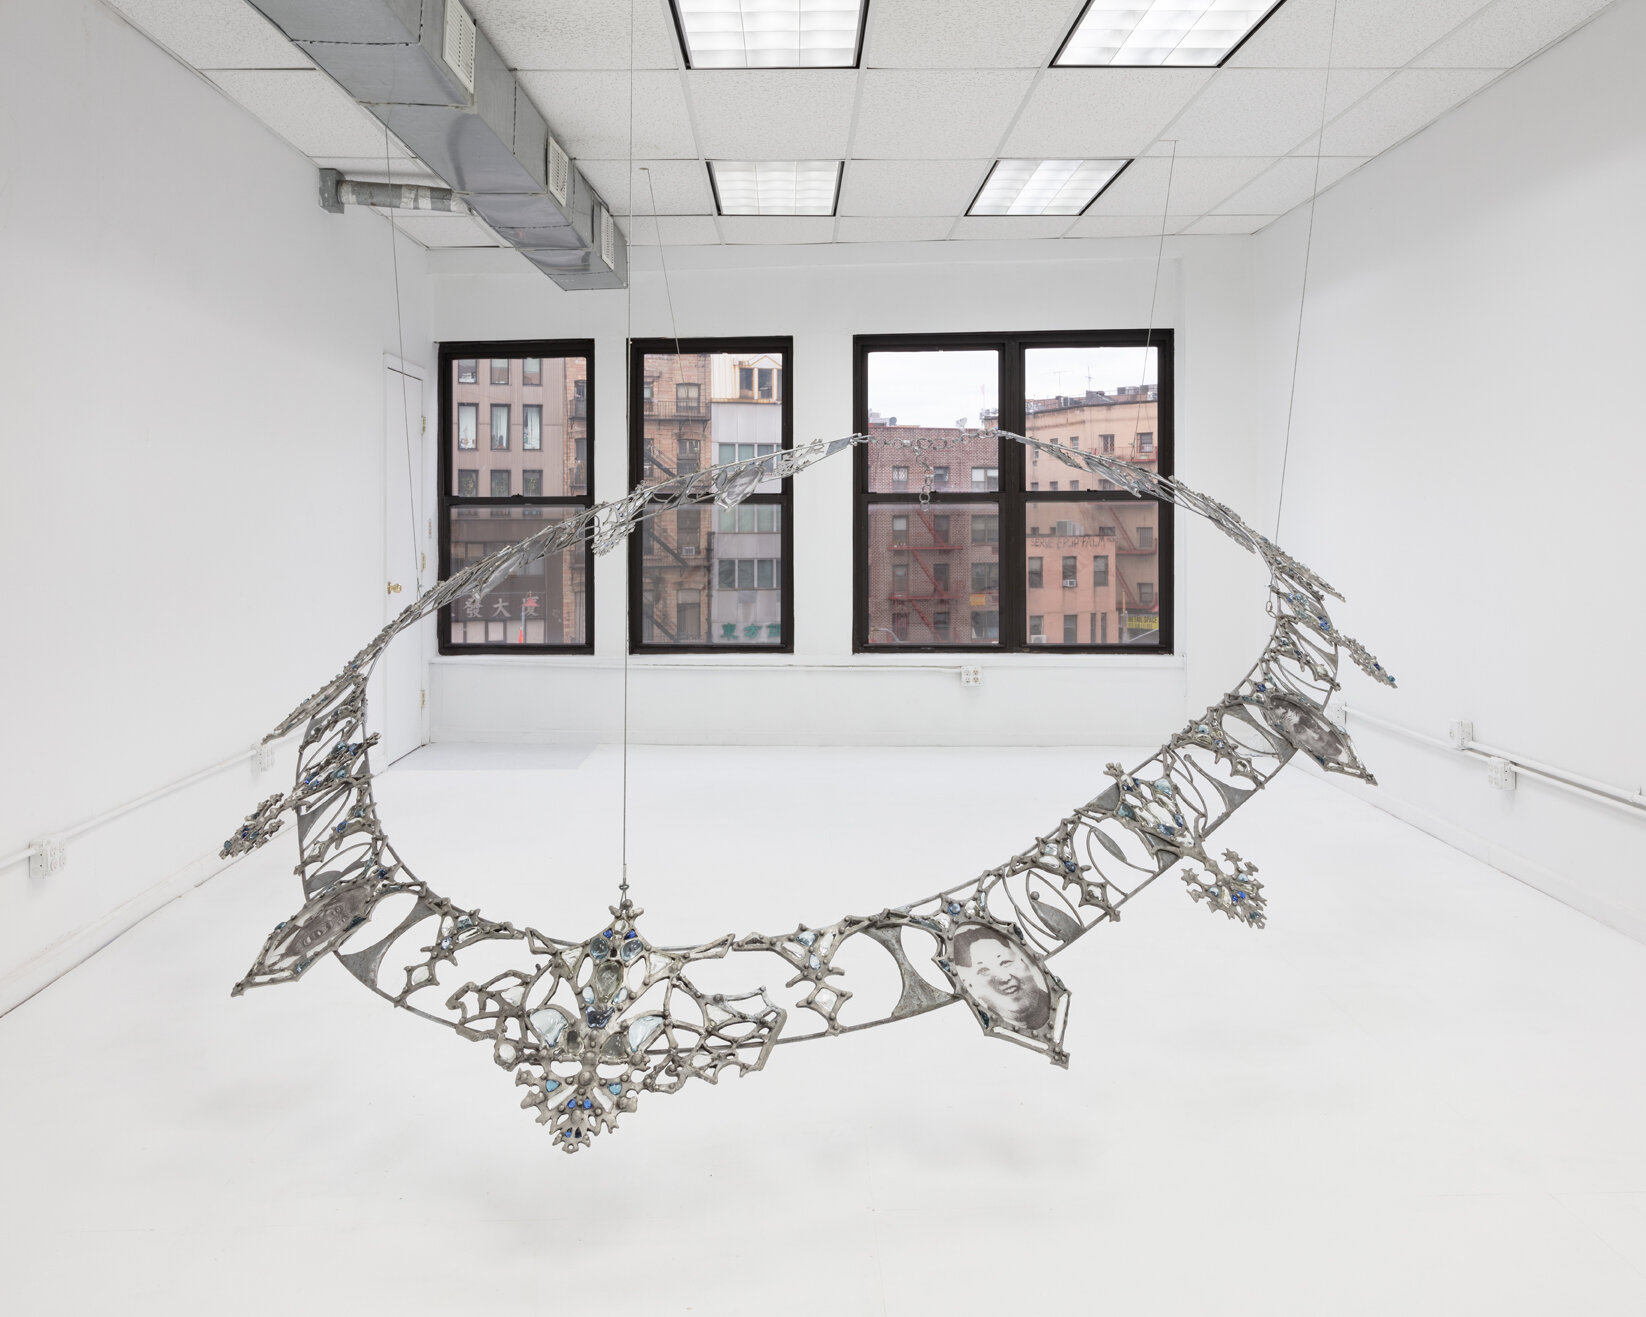   Fallout Necklace , 2018. From the series  Trophies of Abuse.  Patined cast aluminum, patined steel, flame-worked glass, powder printed glass. 84 x 120 x 180 inches. Installation view   at Lubov, New York, 2020. 